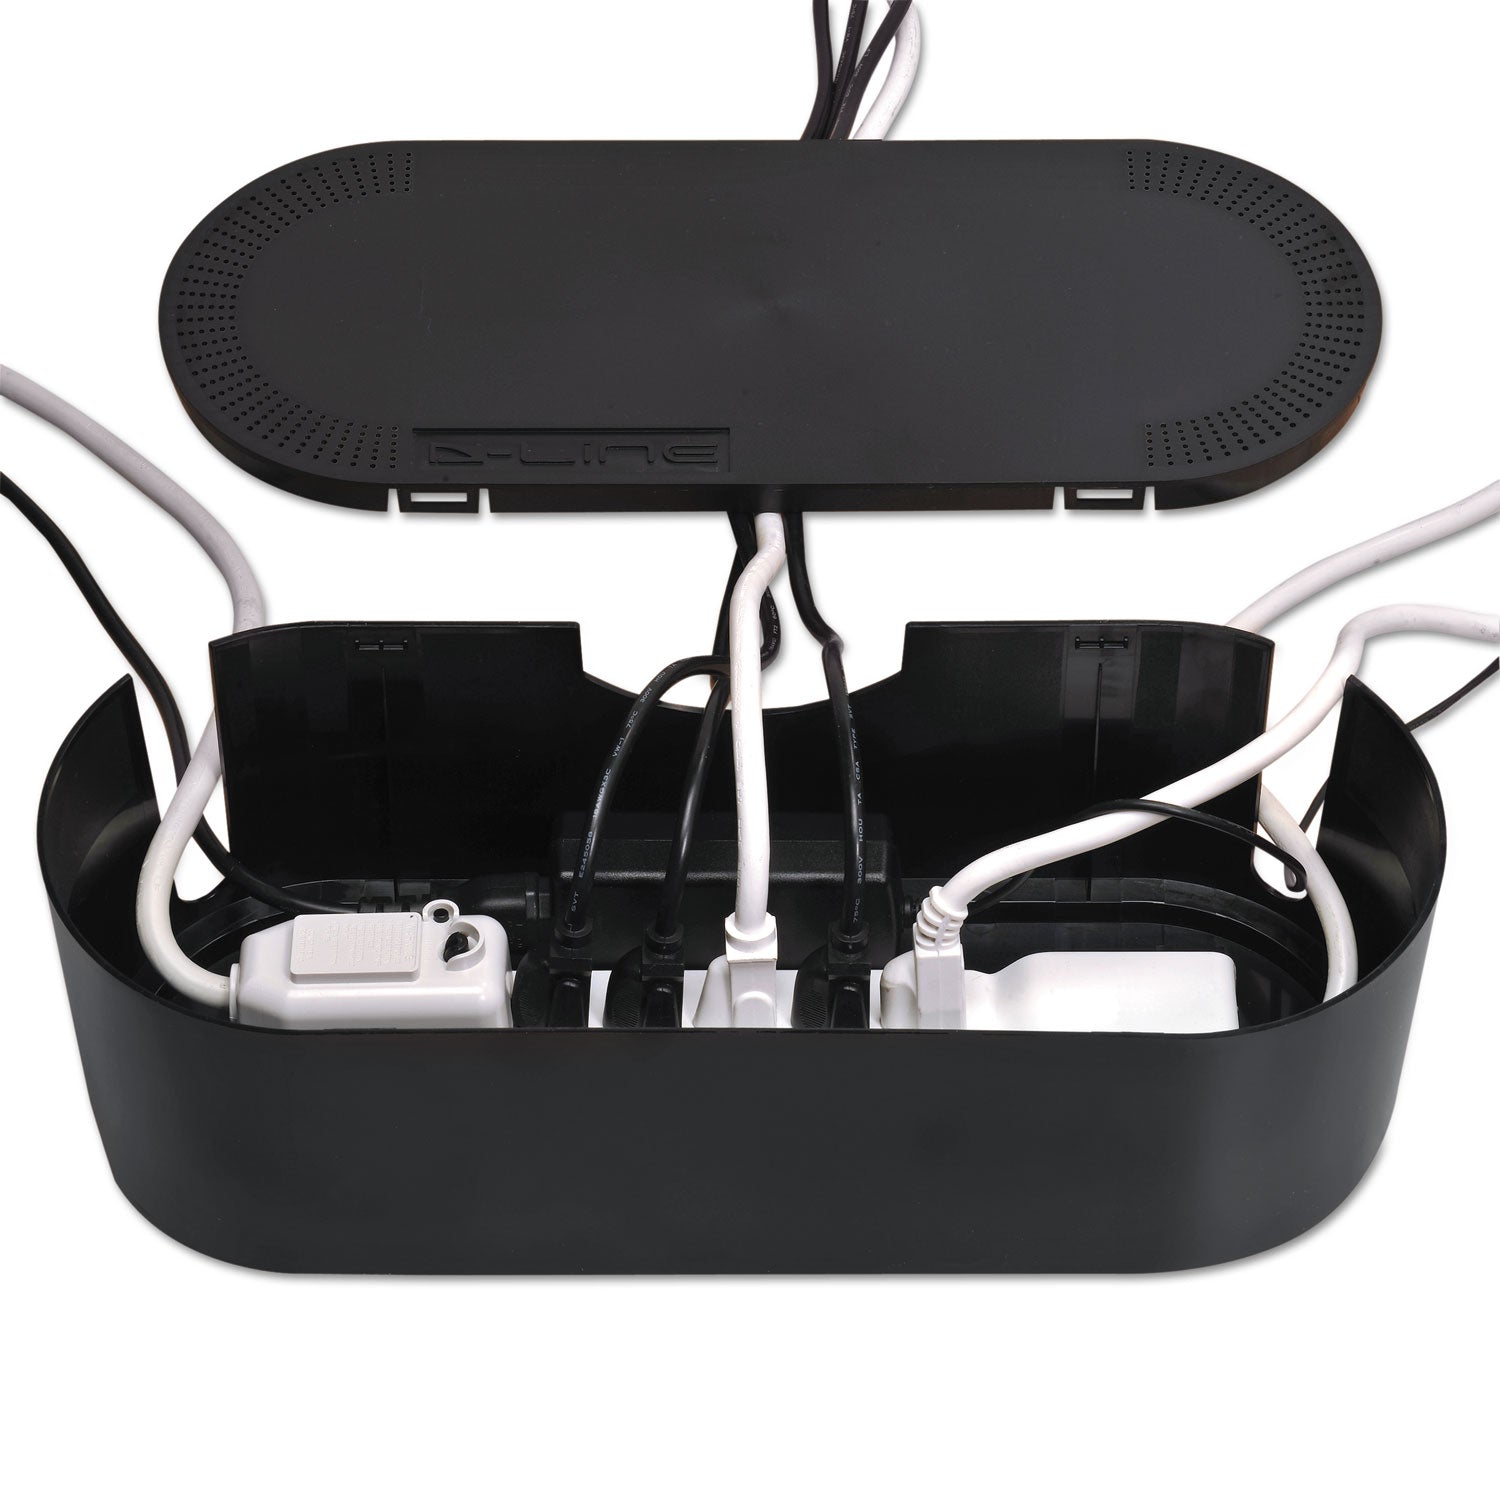 Large Cable Tidy Units, 16.5" x 6.5" x 5.25", Black - 